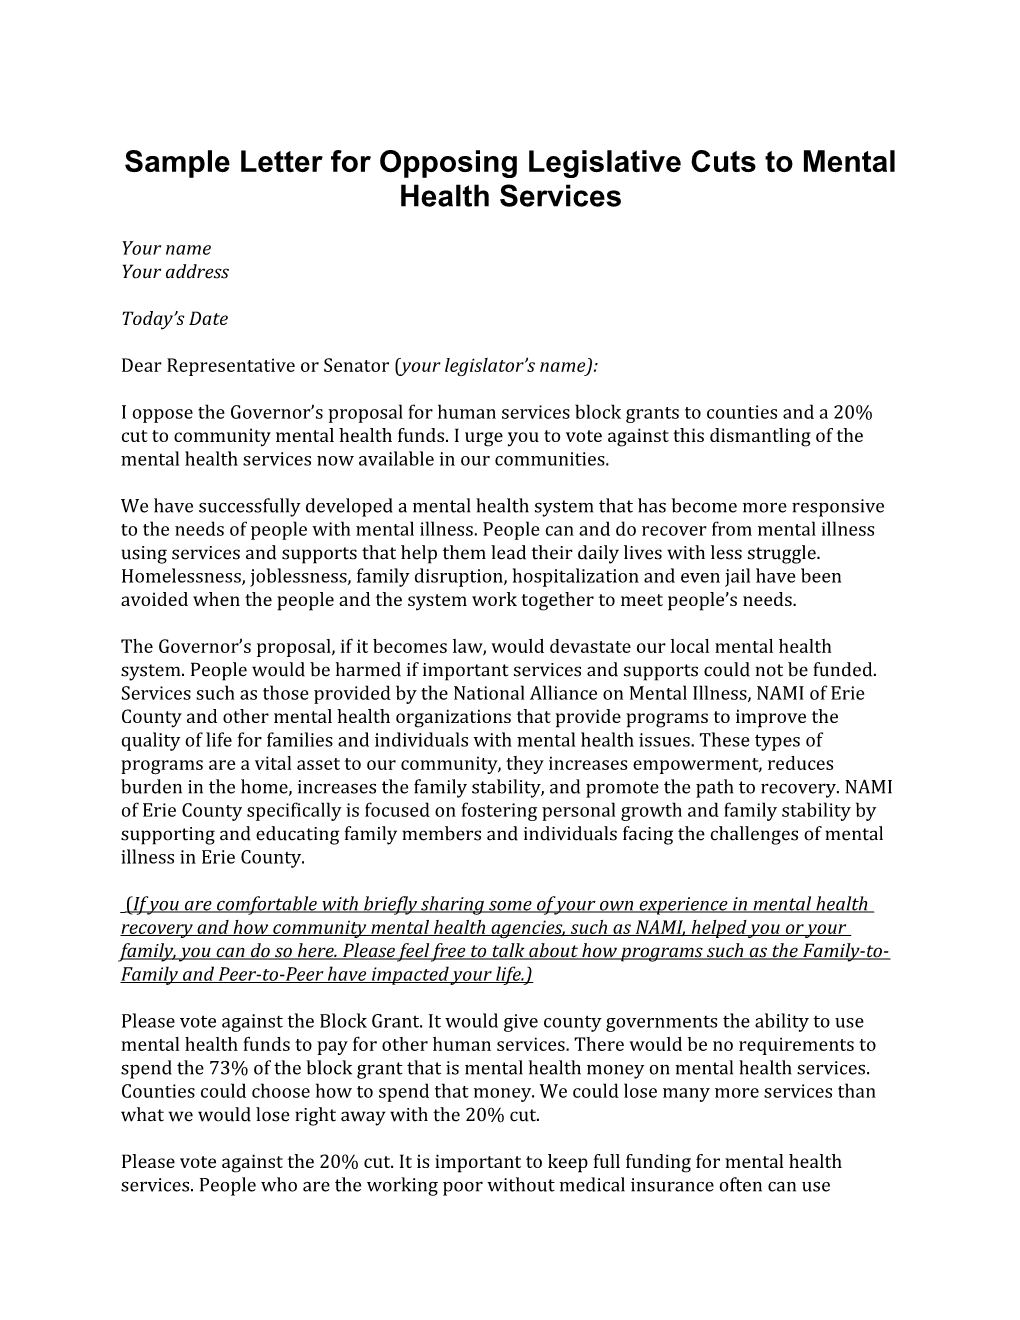 Sample Letter for Opposing Legislative Cuts to Mental Health Services